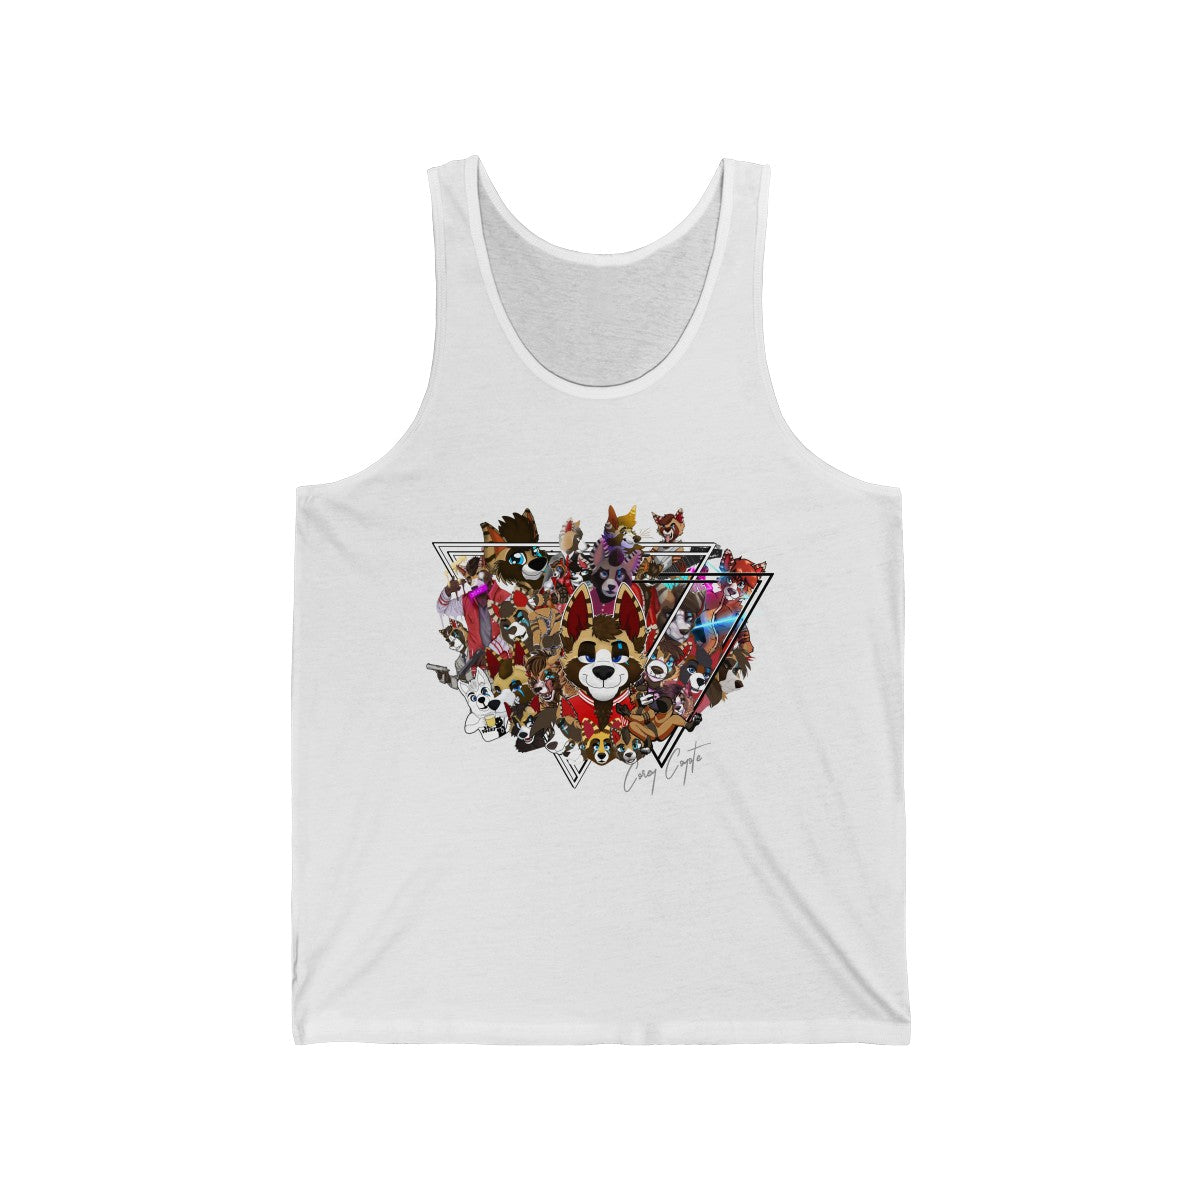 For The Fans - Tank Top Tank Top Corey Coyote White XS 